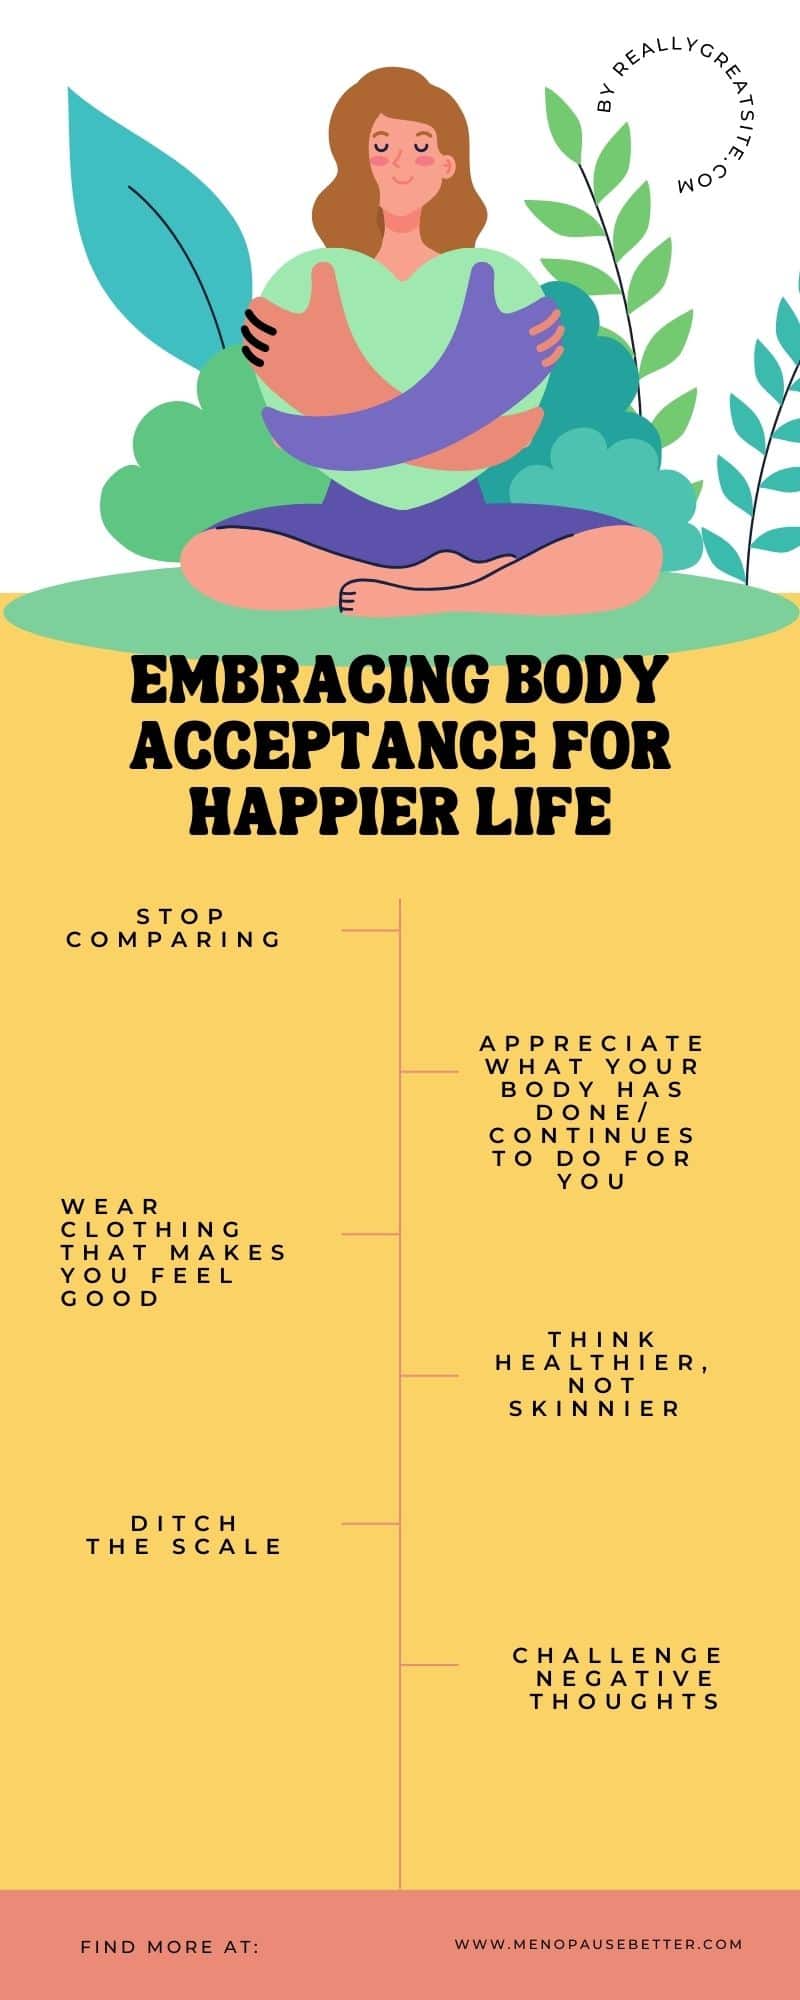 Embracing Body Acceptance for Happier Life